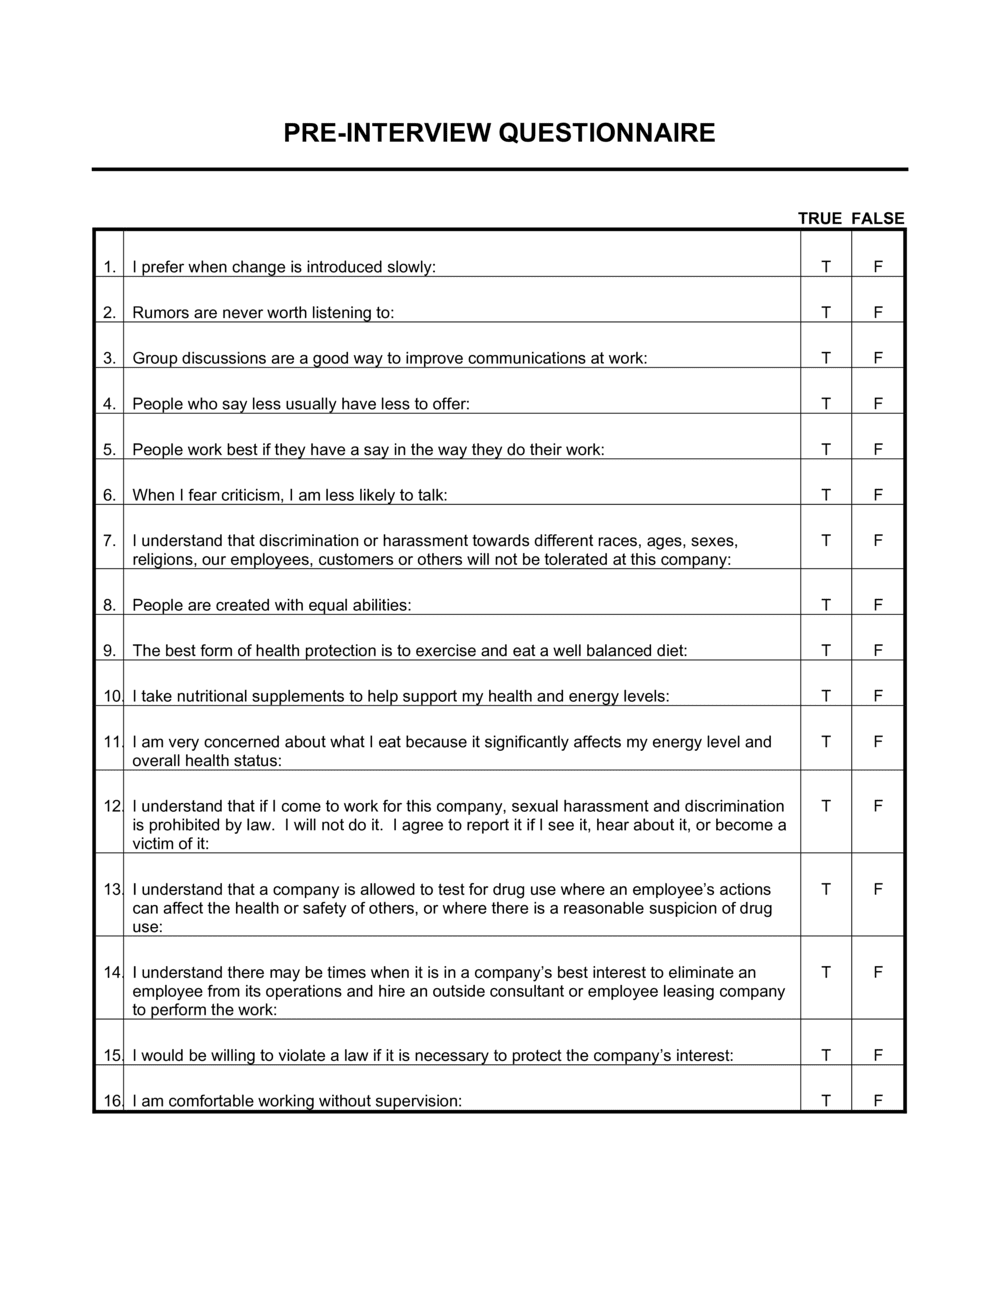 Pre-Interview Questionnaire Template  by Business-in-a-Box™ With Business Requirements Questionnaire Template